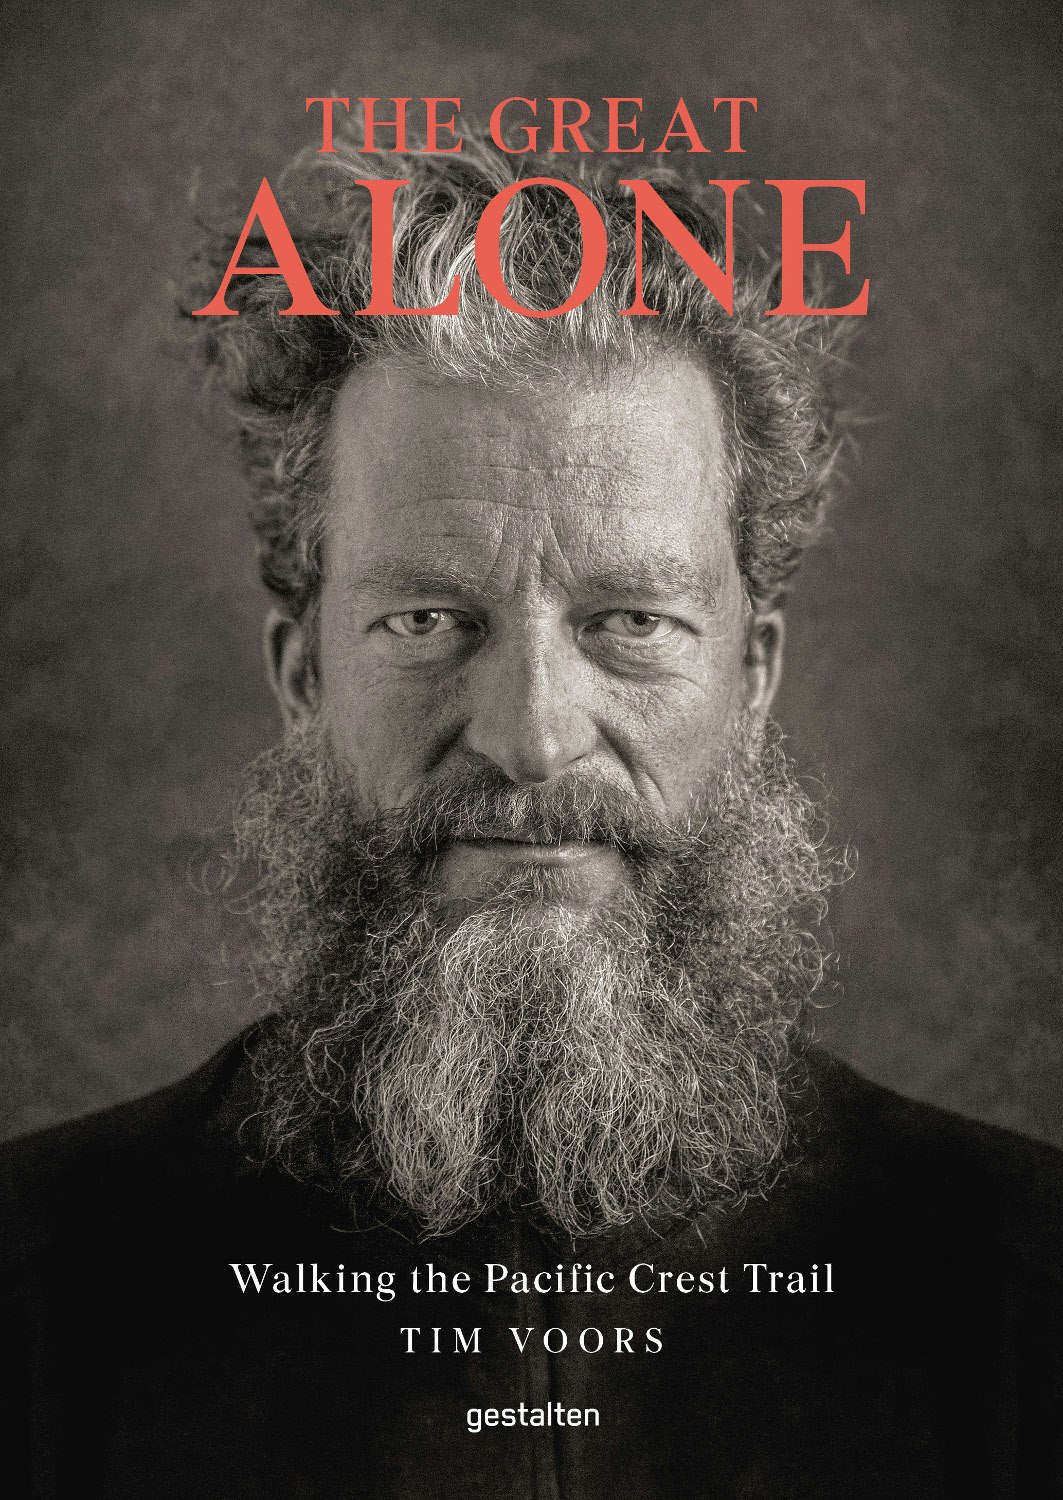 The cover of The Great Alone.